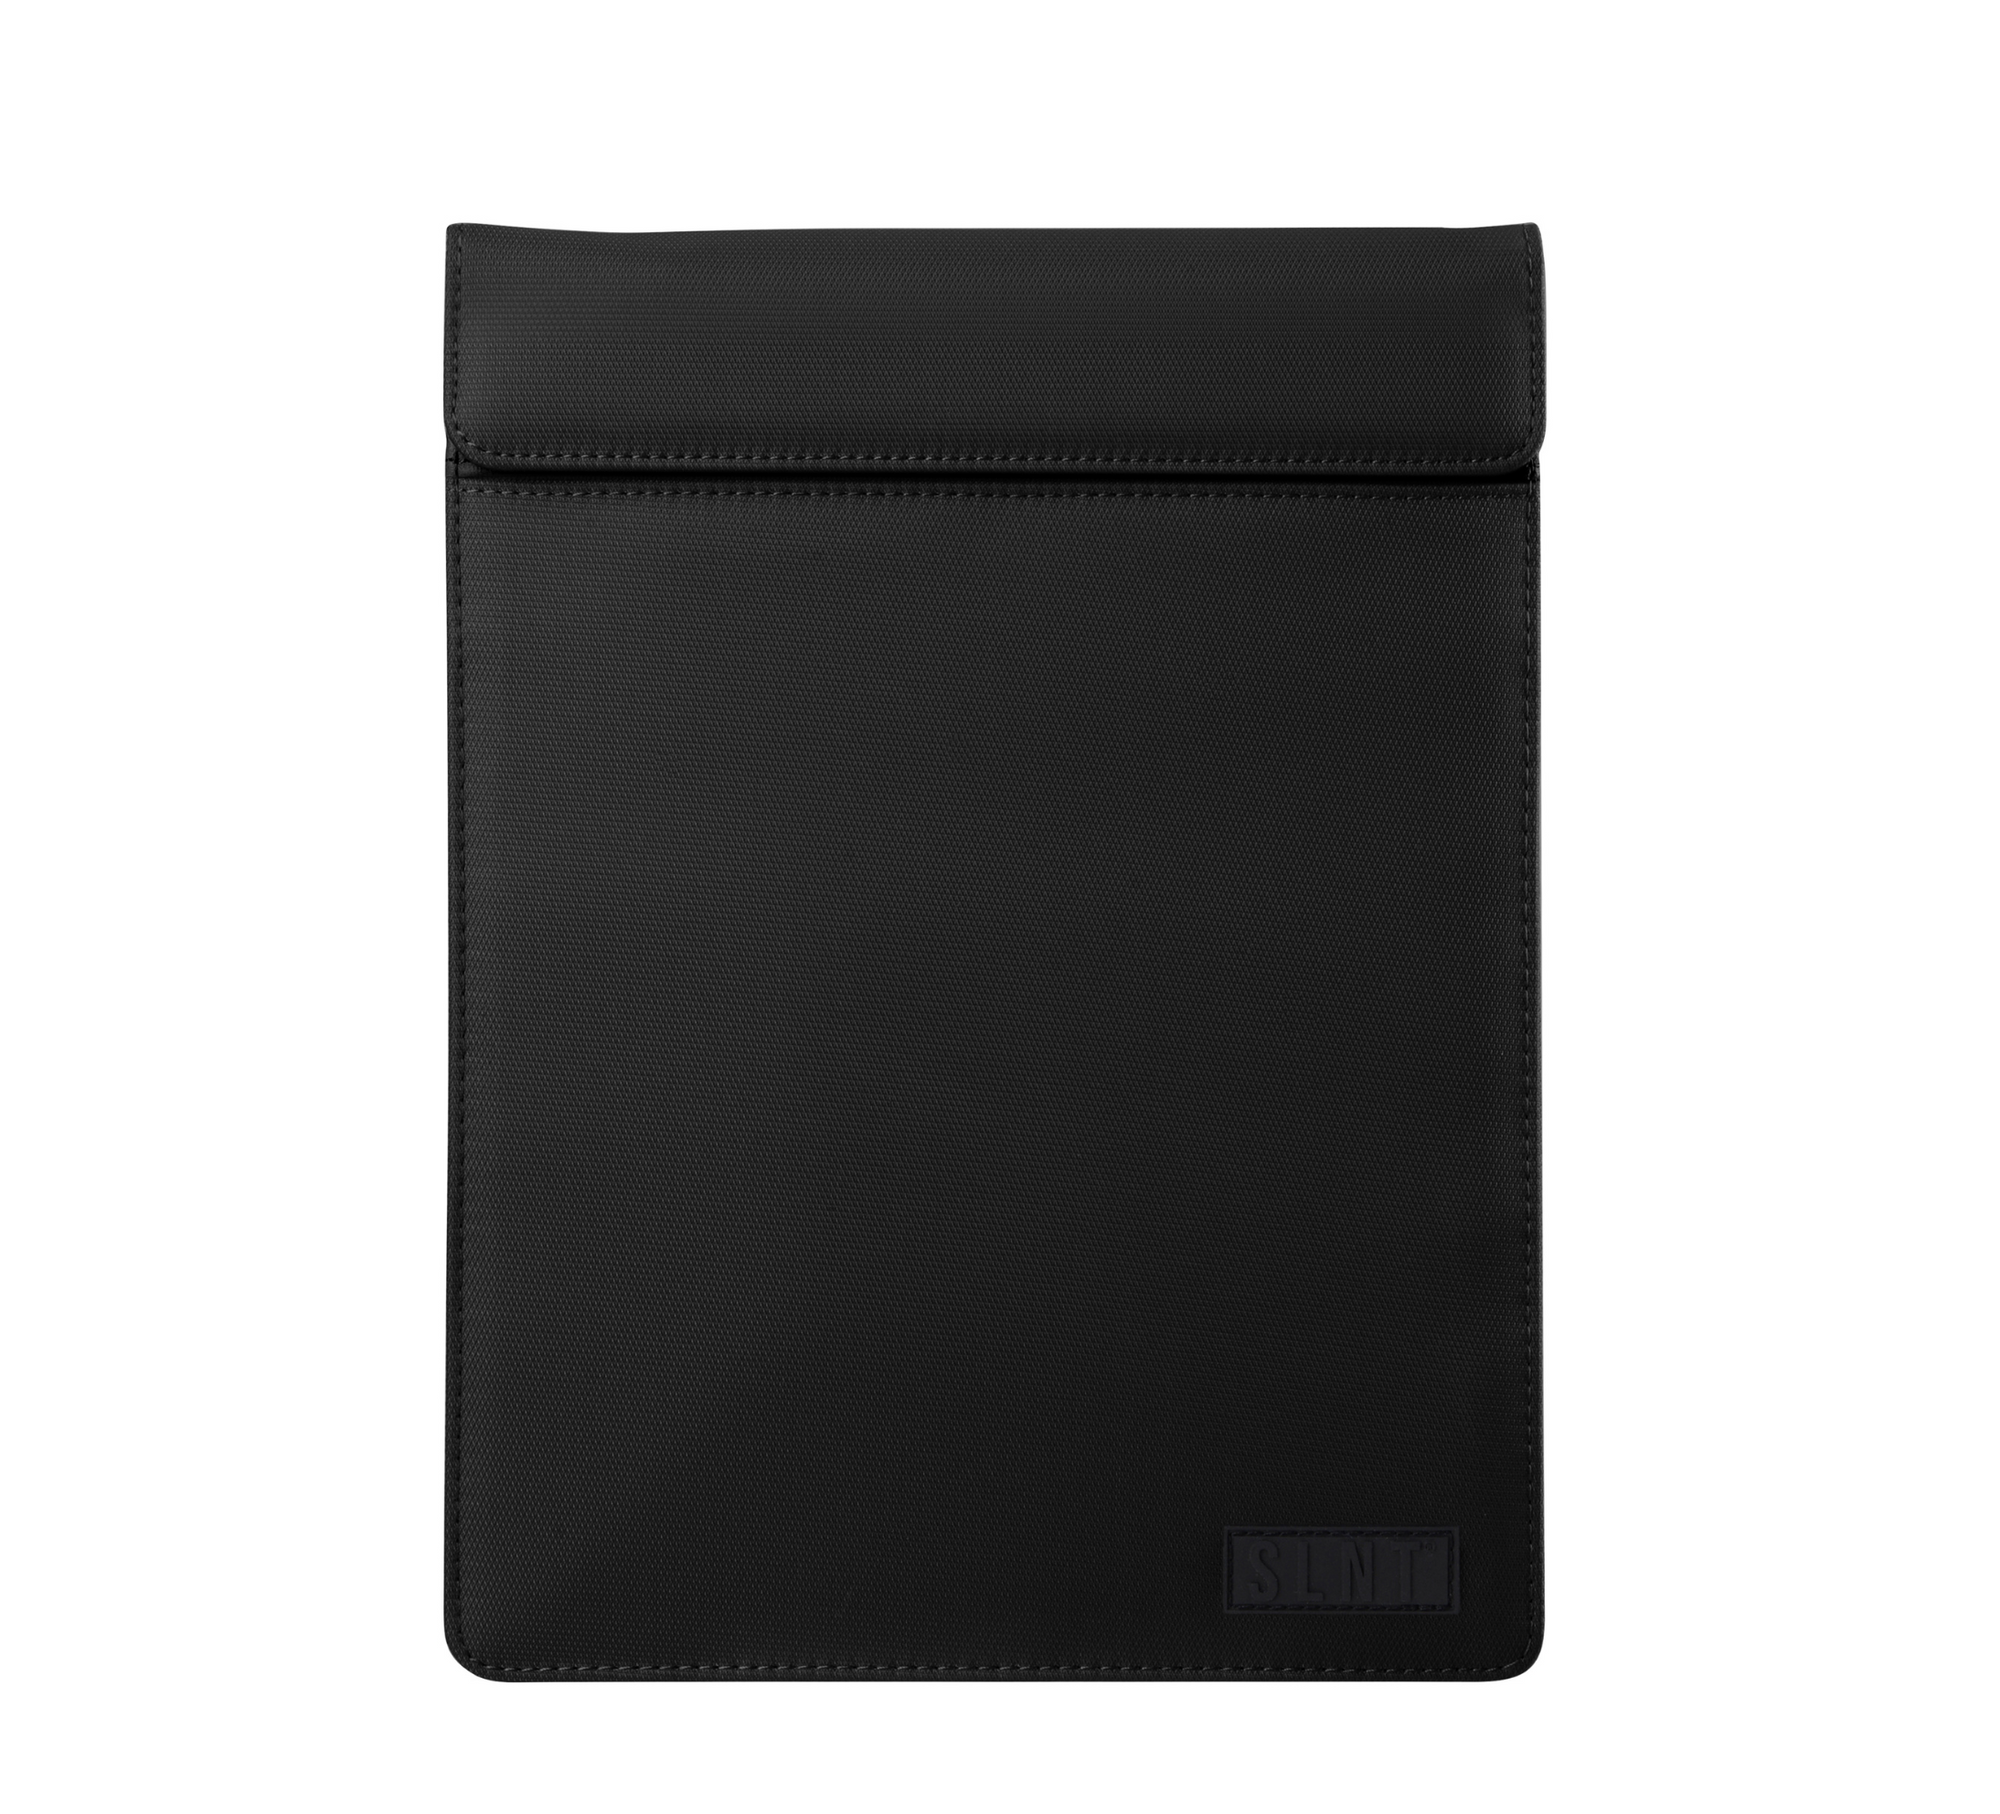 SLNT Utility Faraday Sleeves for Tablets Weatherproof Nylon Black Accessories SLNT Tactical Gear Supplier Tactical Distributors Australia